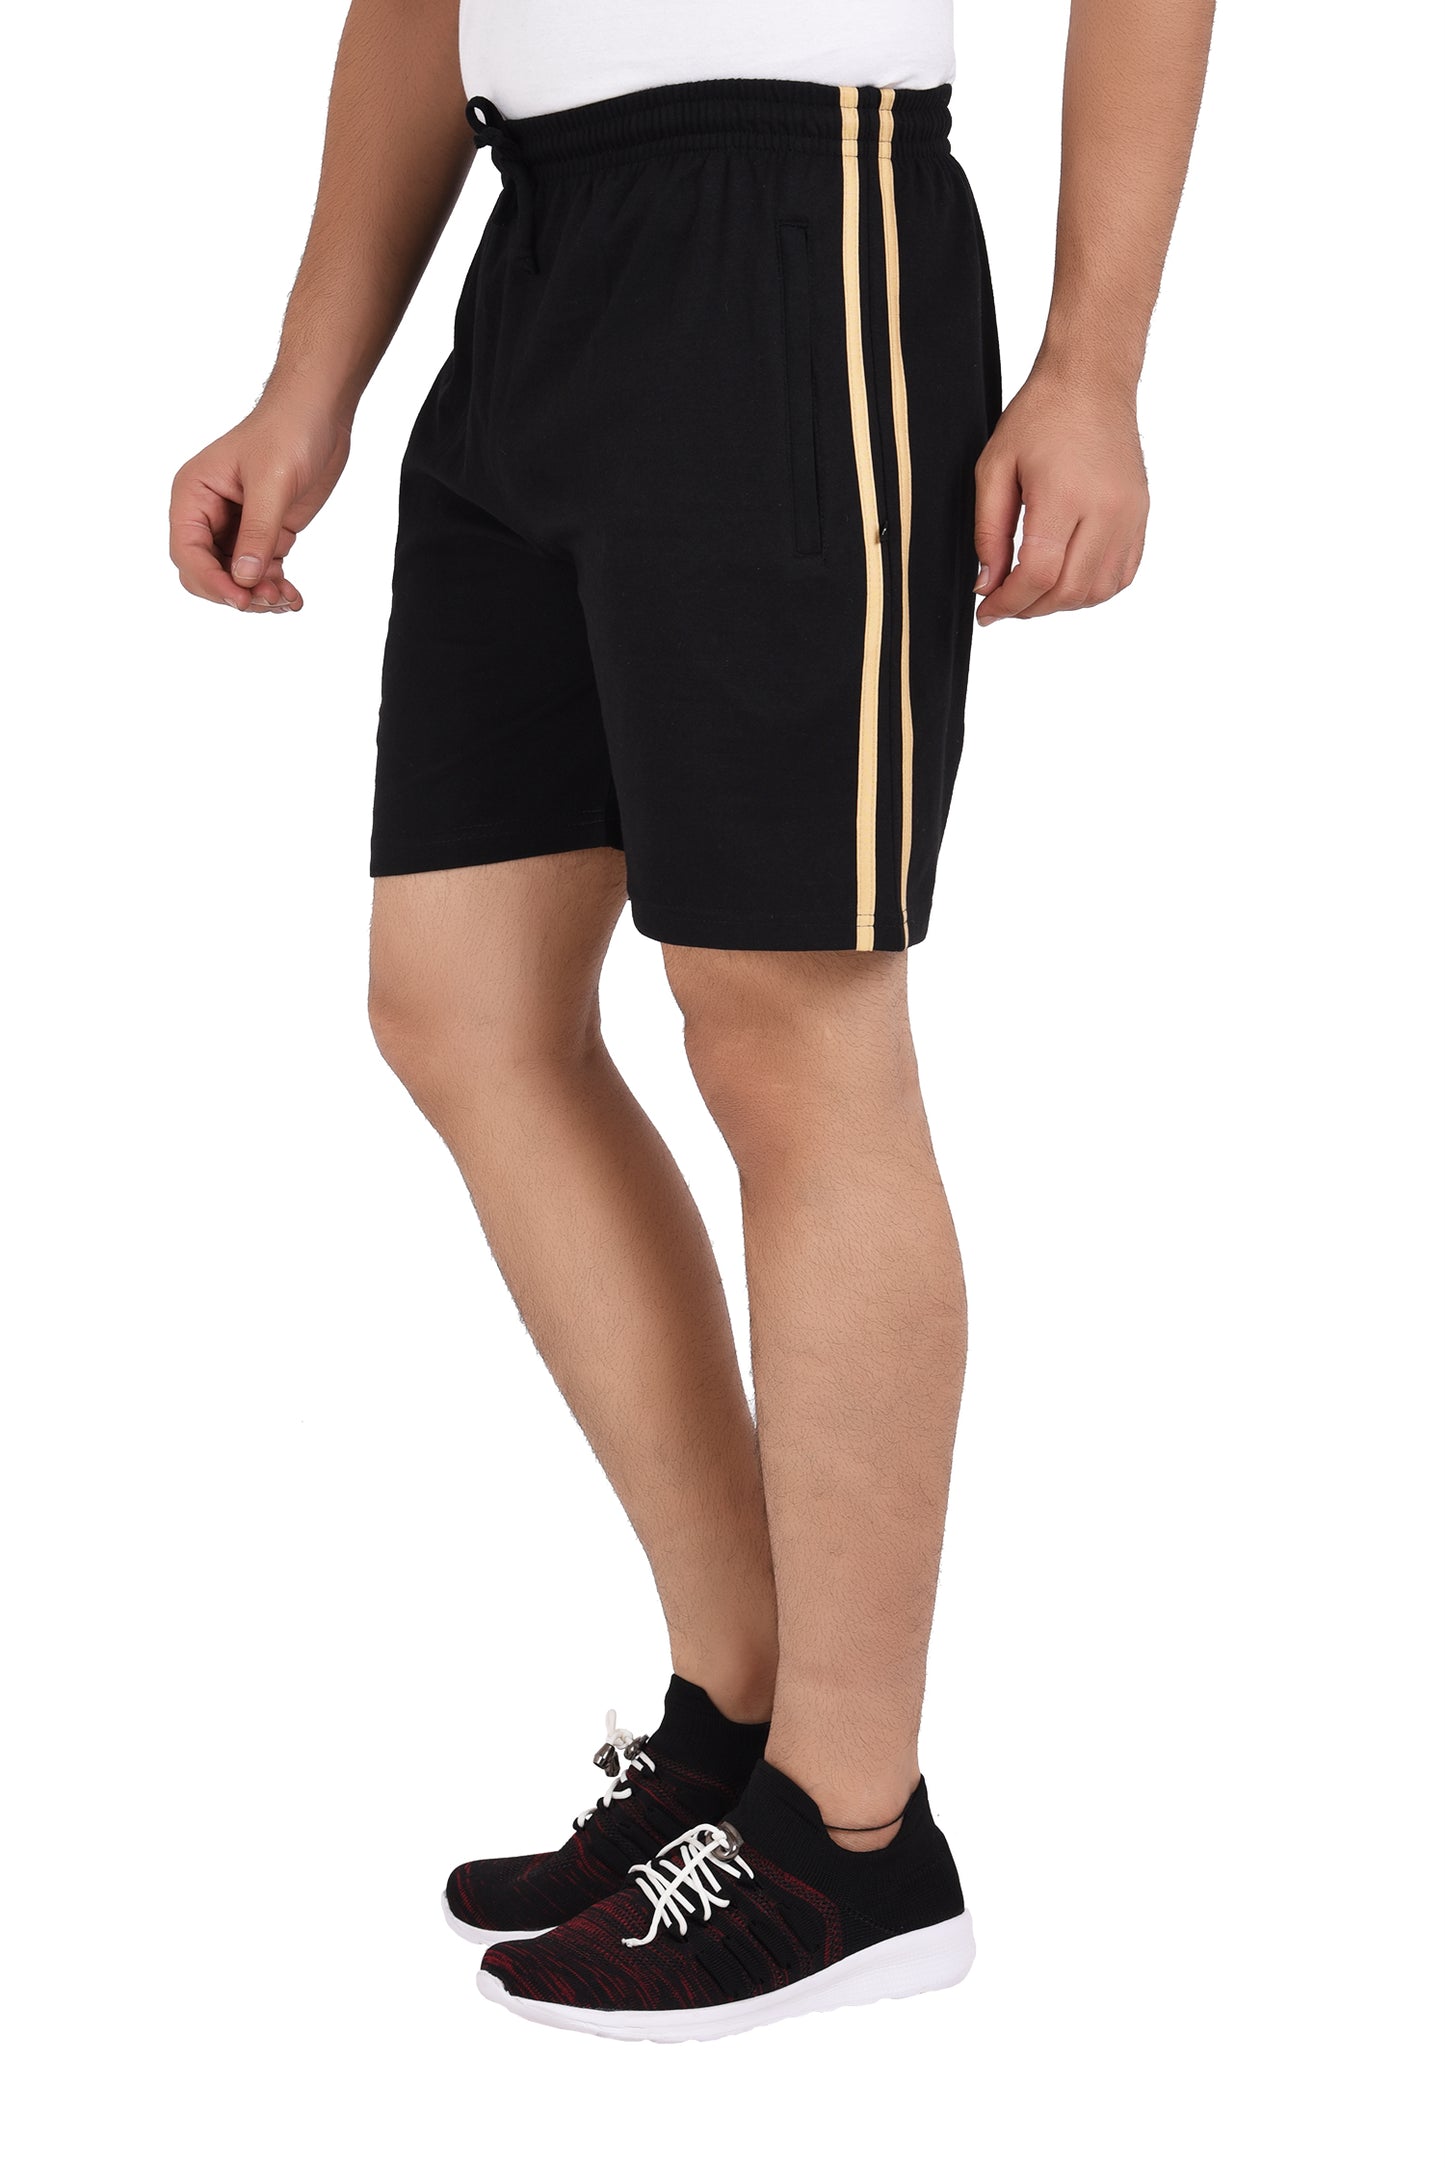 NEO GARMENTS Men’s Cotton Stripped Chain Pockets Long Shorts. | BLACK | SIZES FROM M TO 7XL.